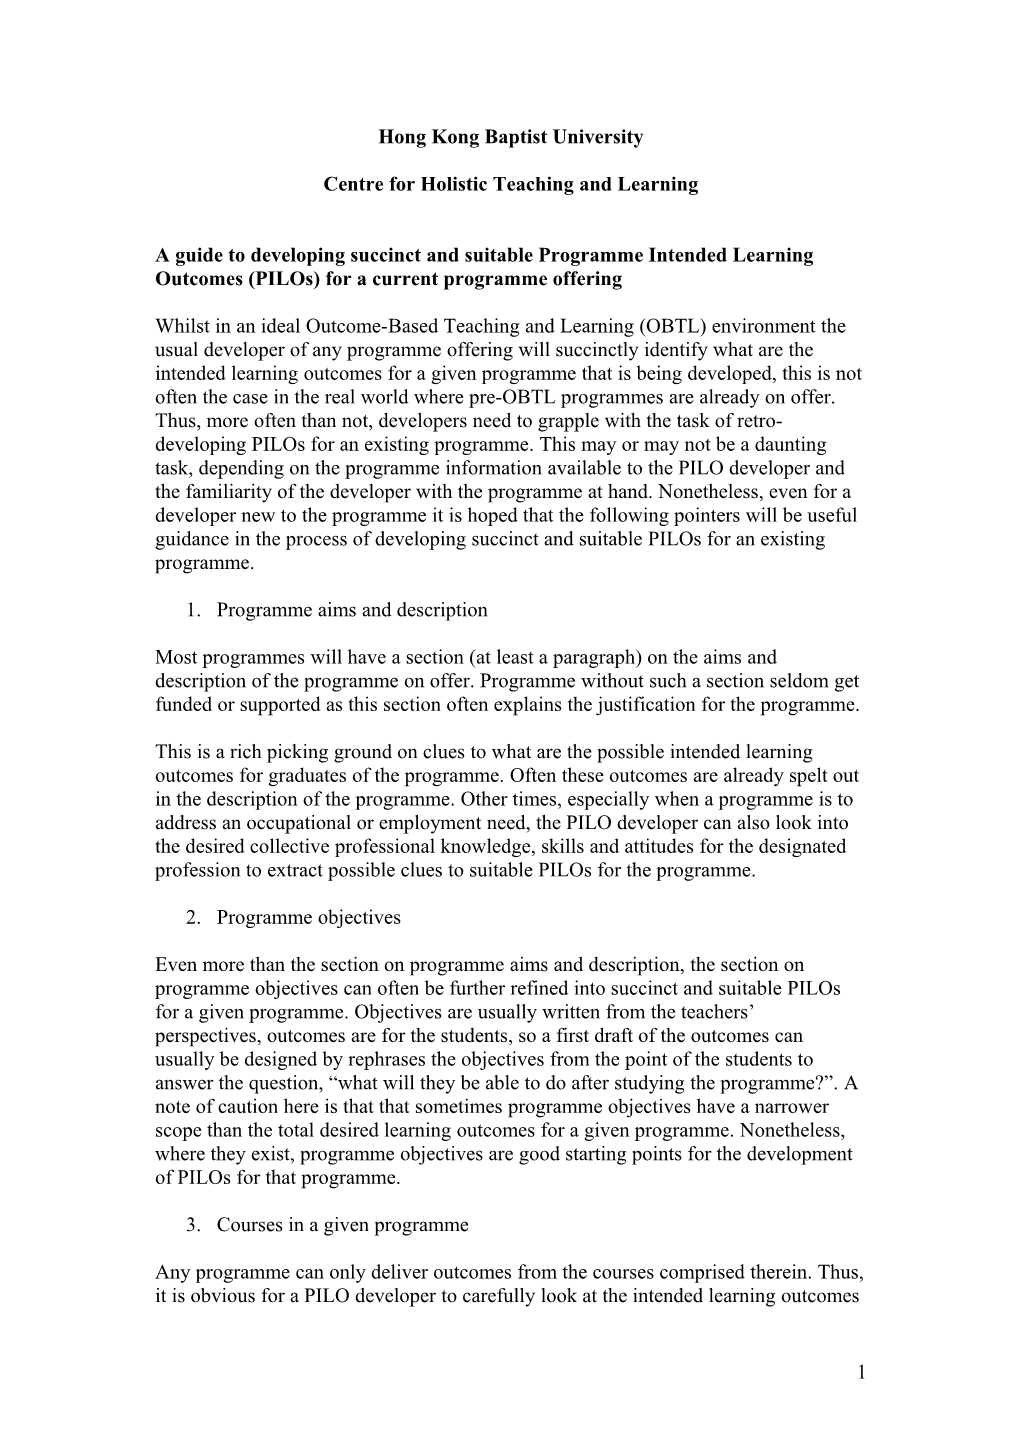 A Guide to Developing Succinct and Suitable Programme Intended Learning Outcomes (Pilos)